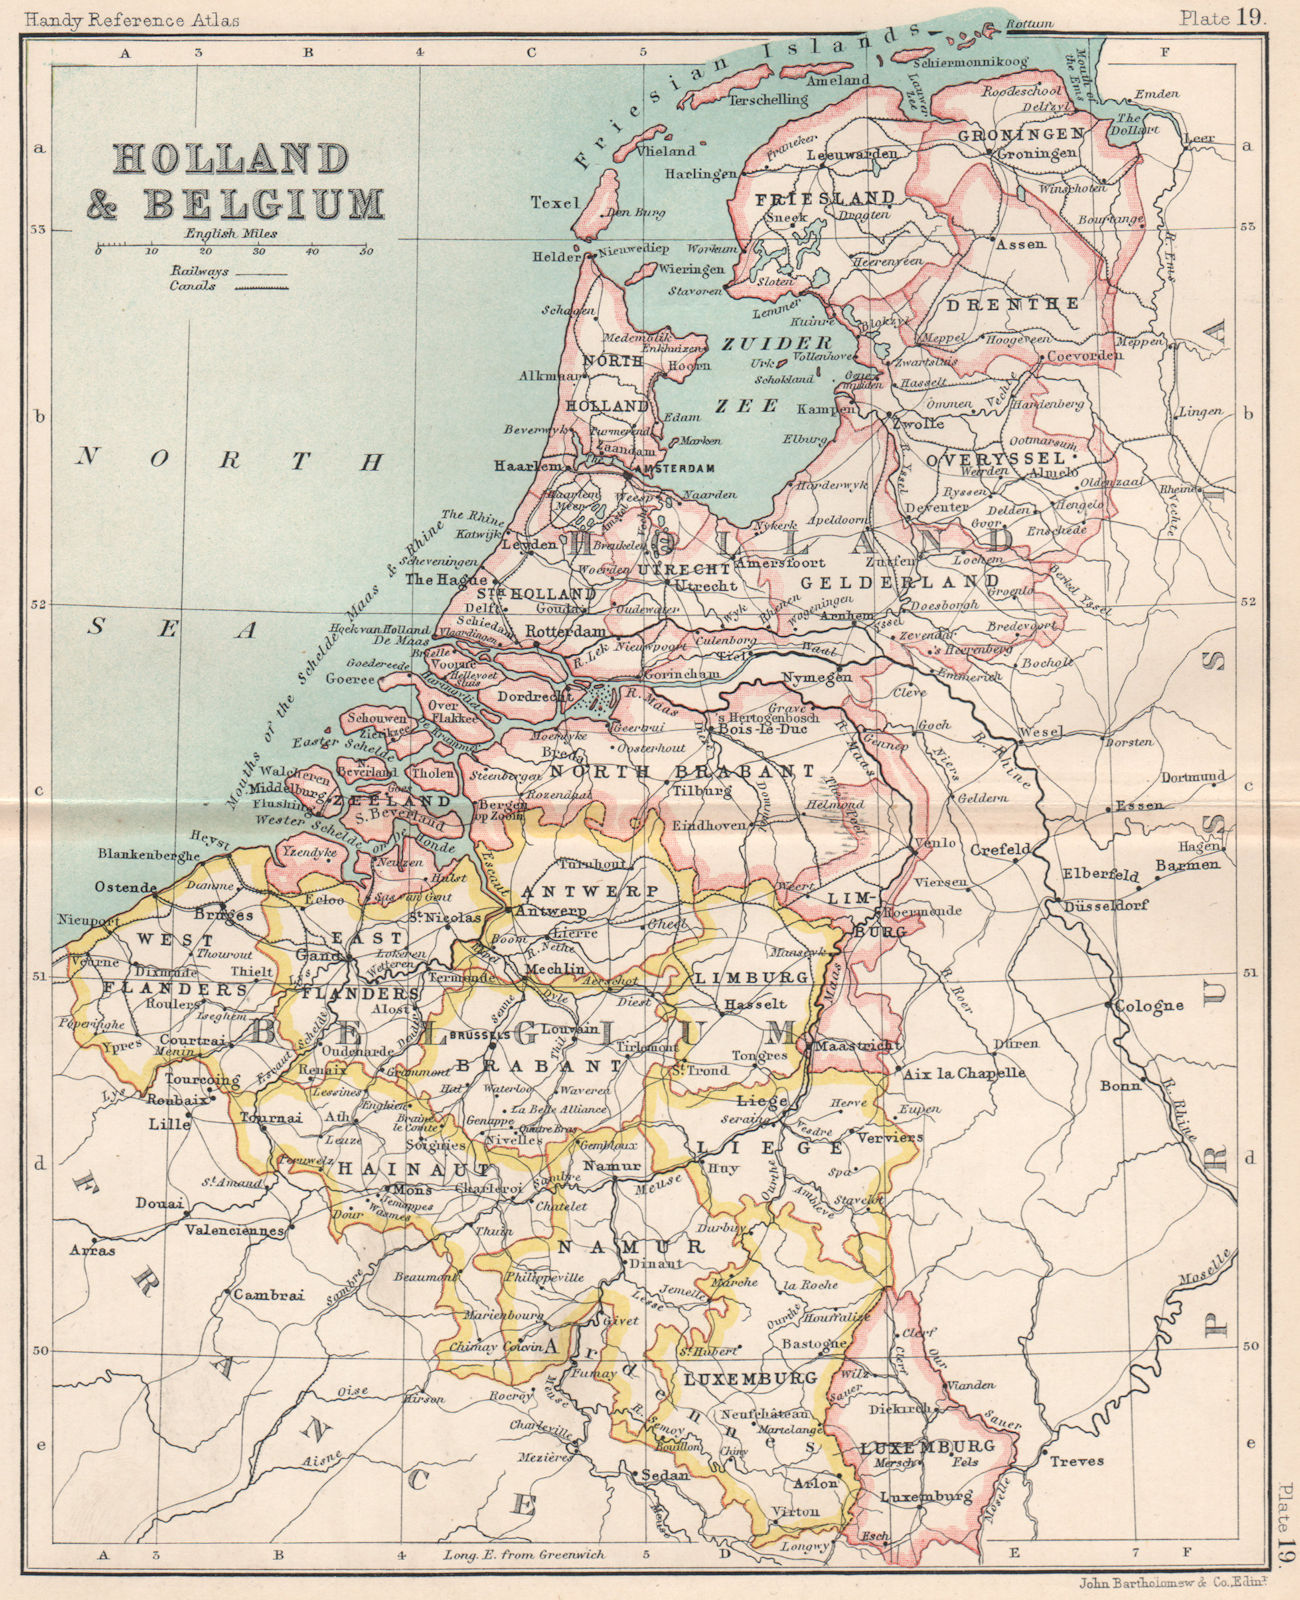 Associate Product Holland and Belgium. Luxembourg. Benelux. BARTHOLOMEW 1904 old antique map